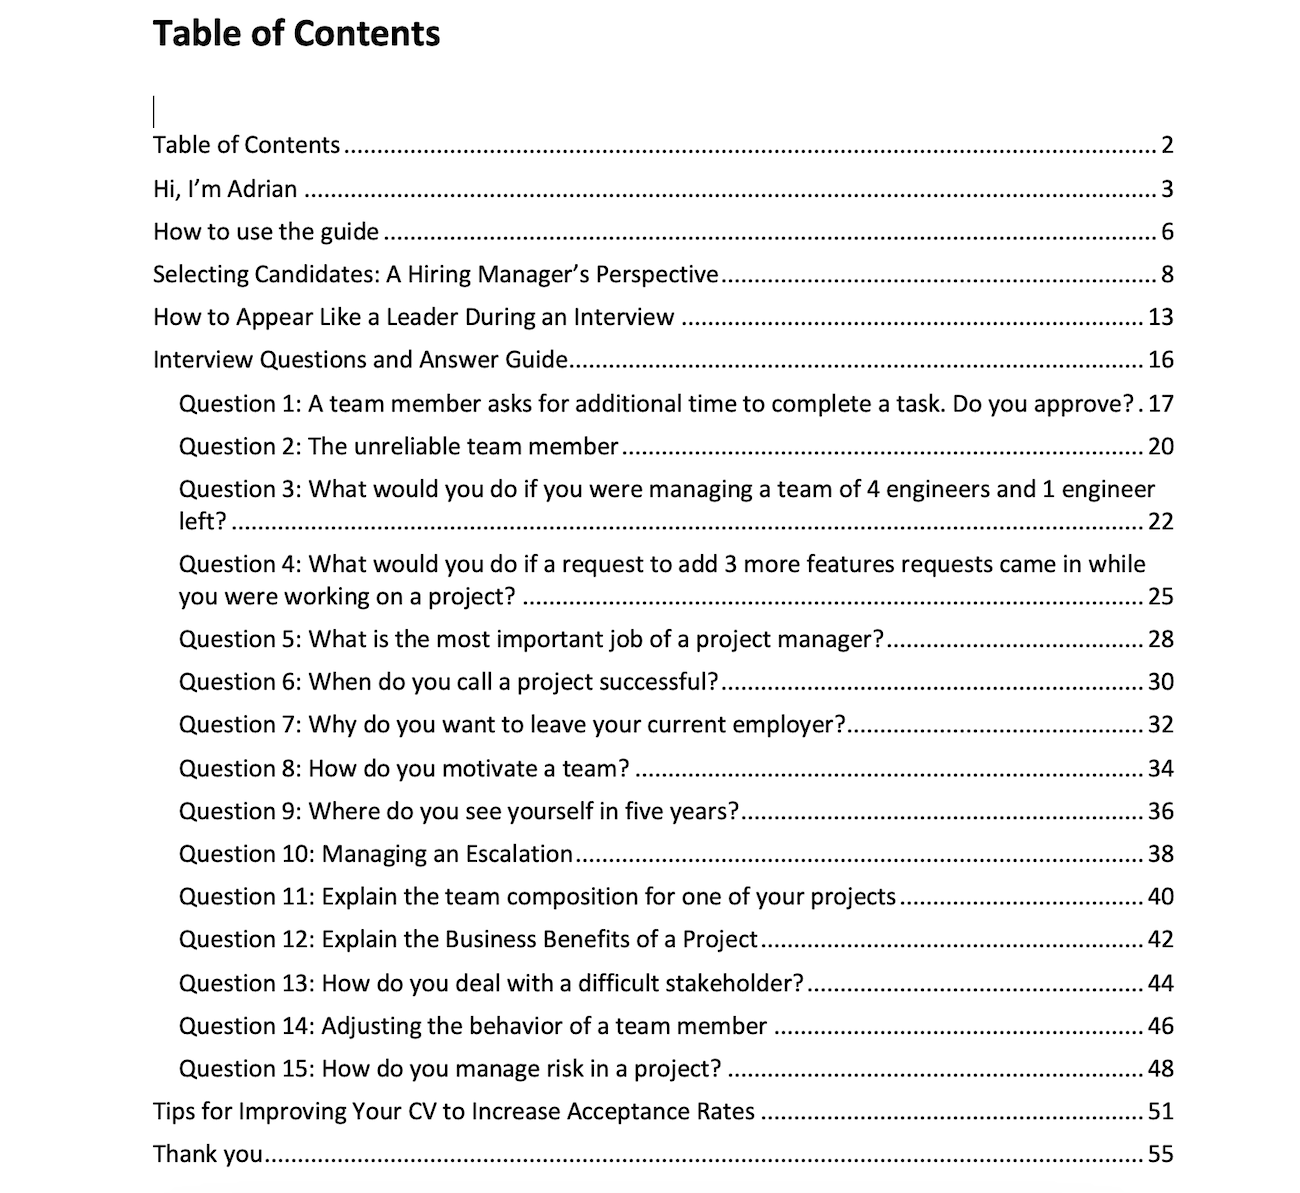 Table of contents from the project manager interview and answer guide